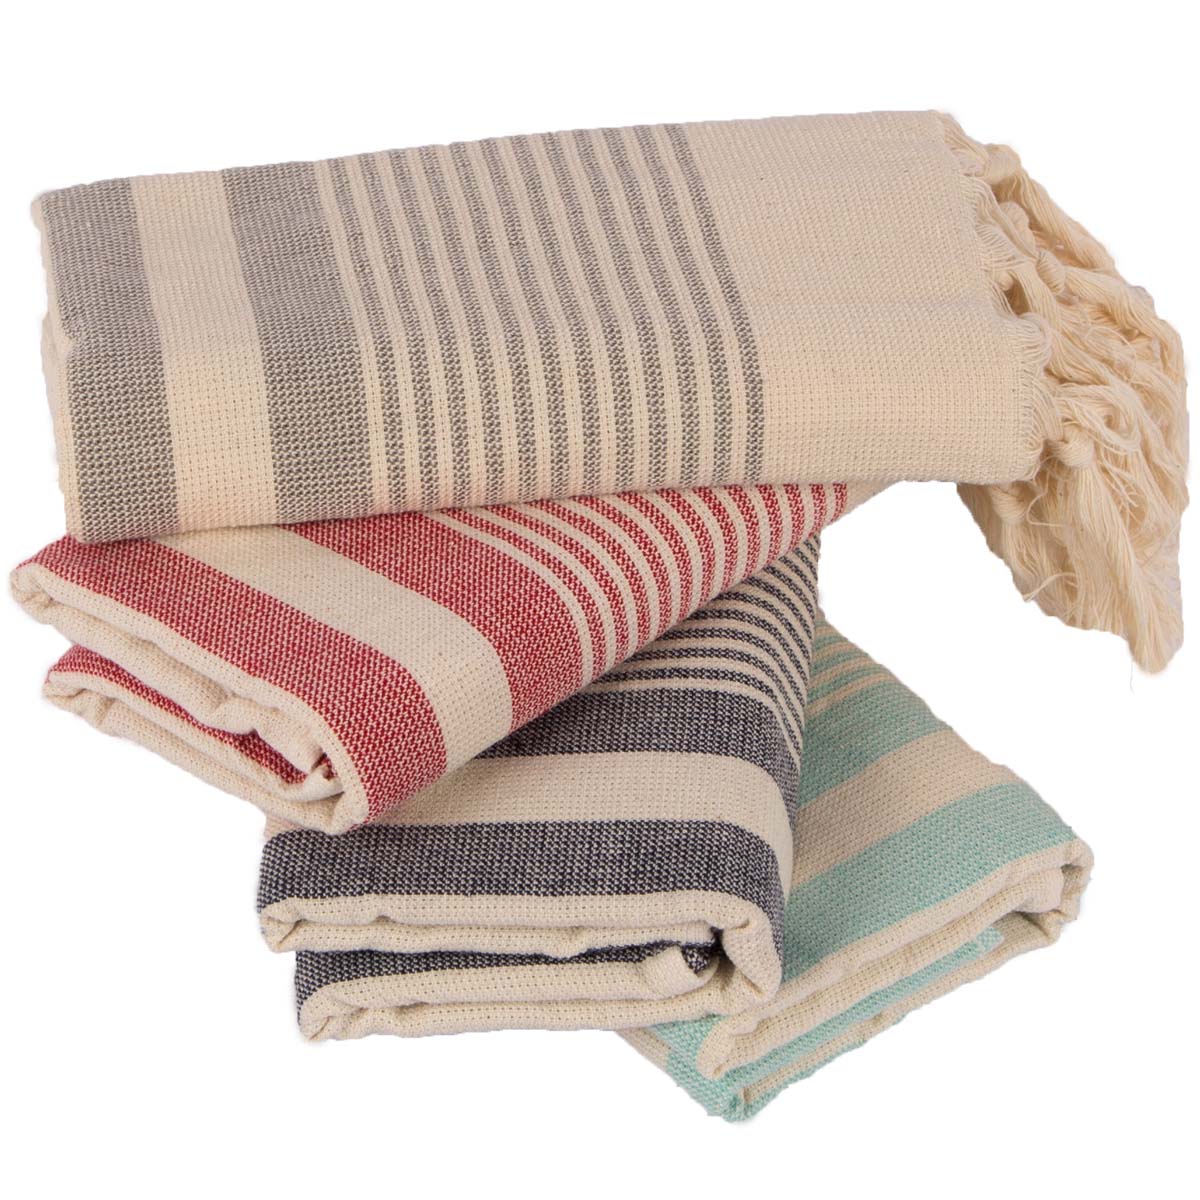 Turkish Hand Towels for Bathroom Set of 4 - 18 x 40 inches